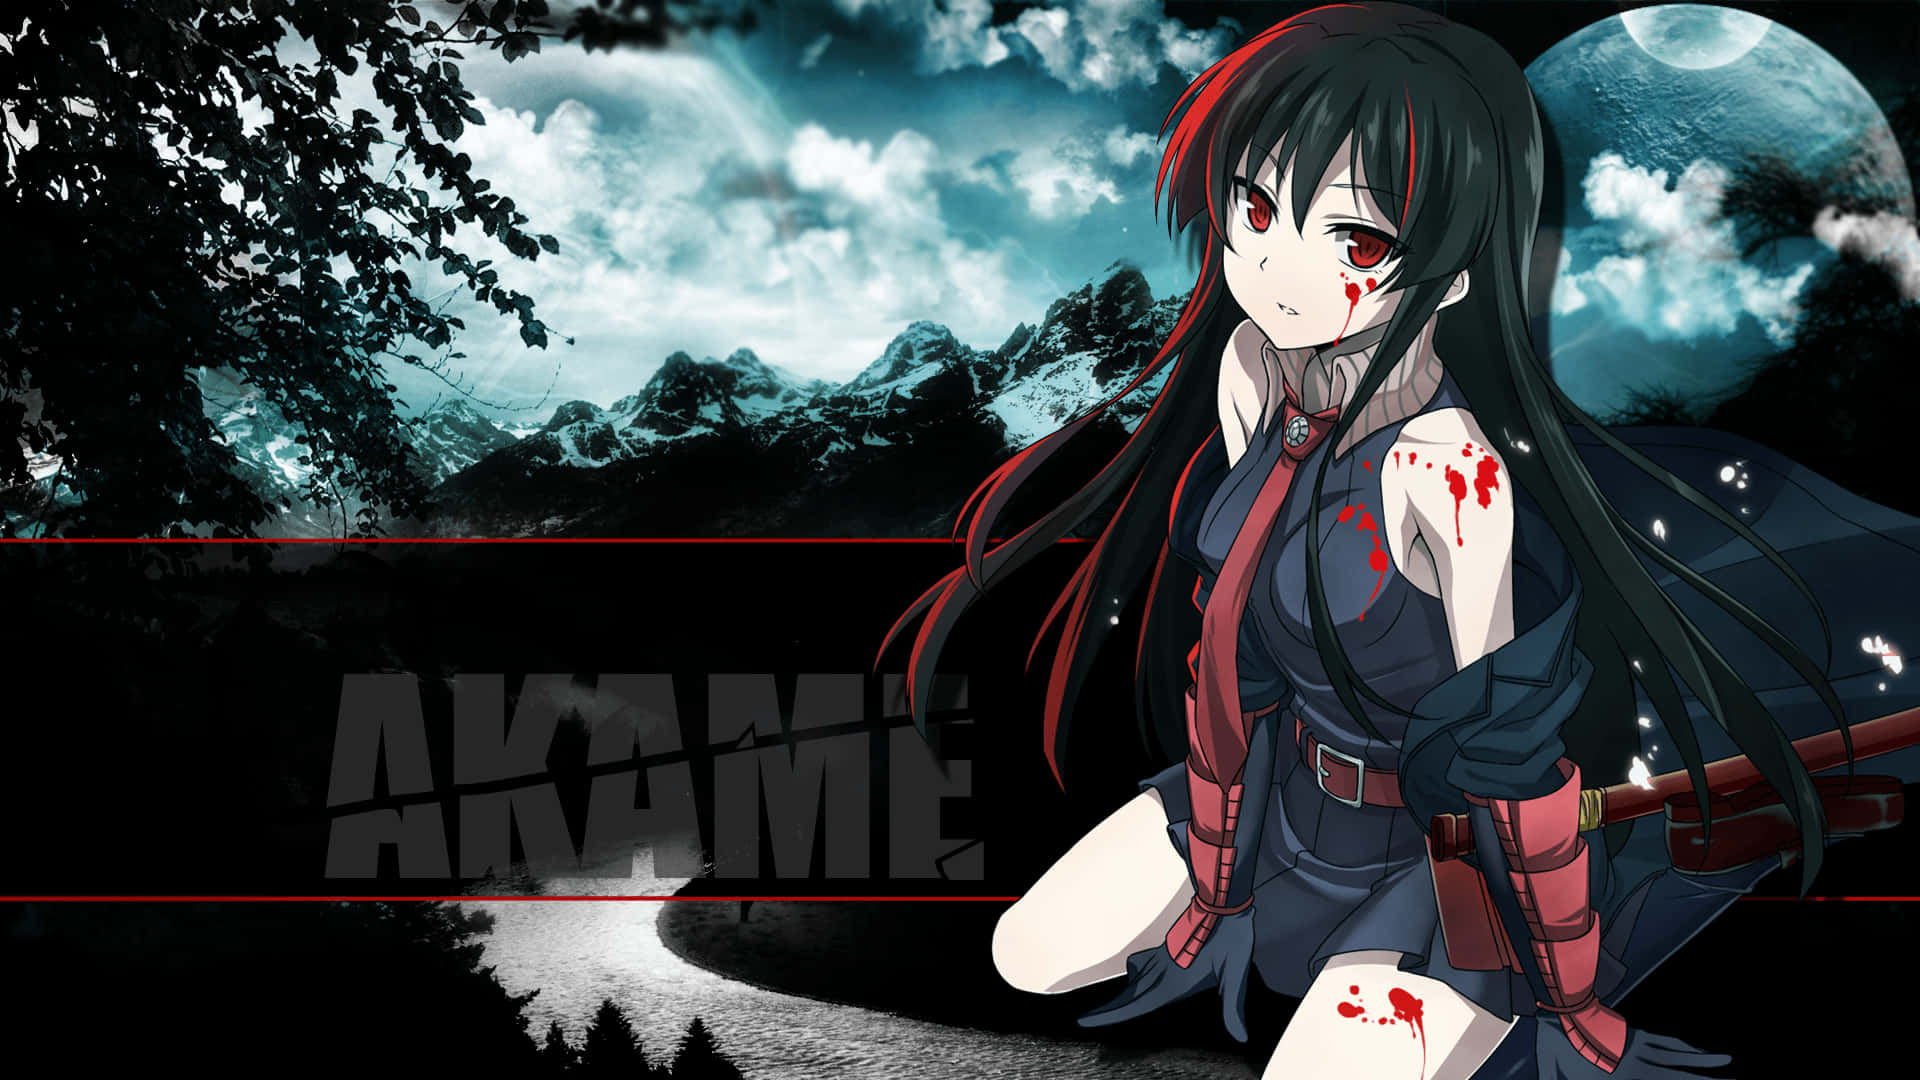 Stylish Assassins in Action in Akame Ga Kill